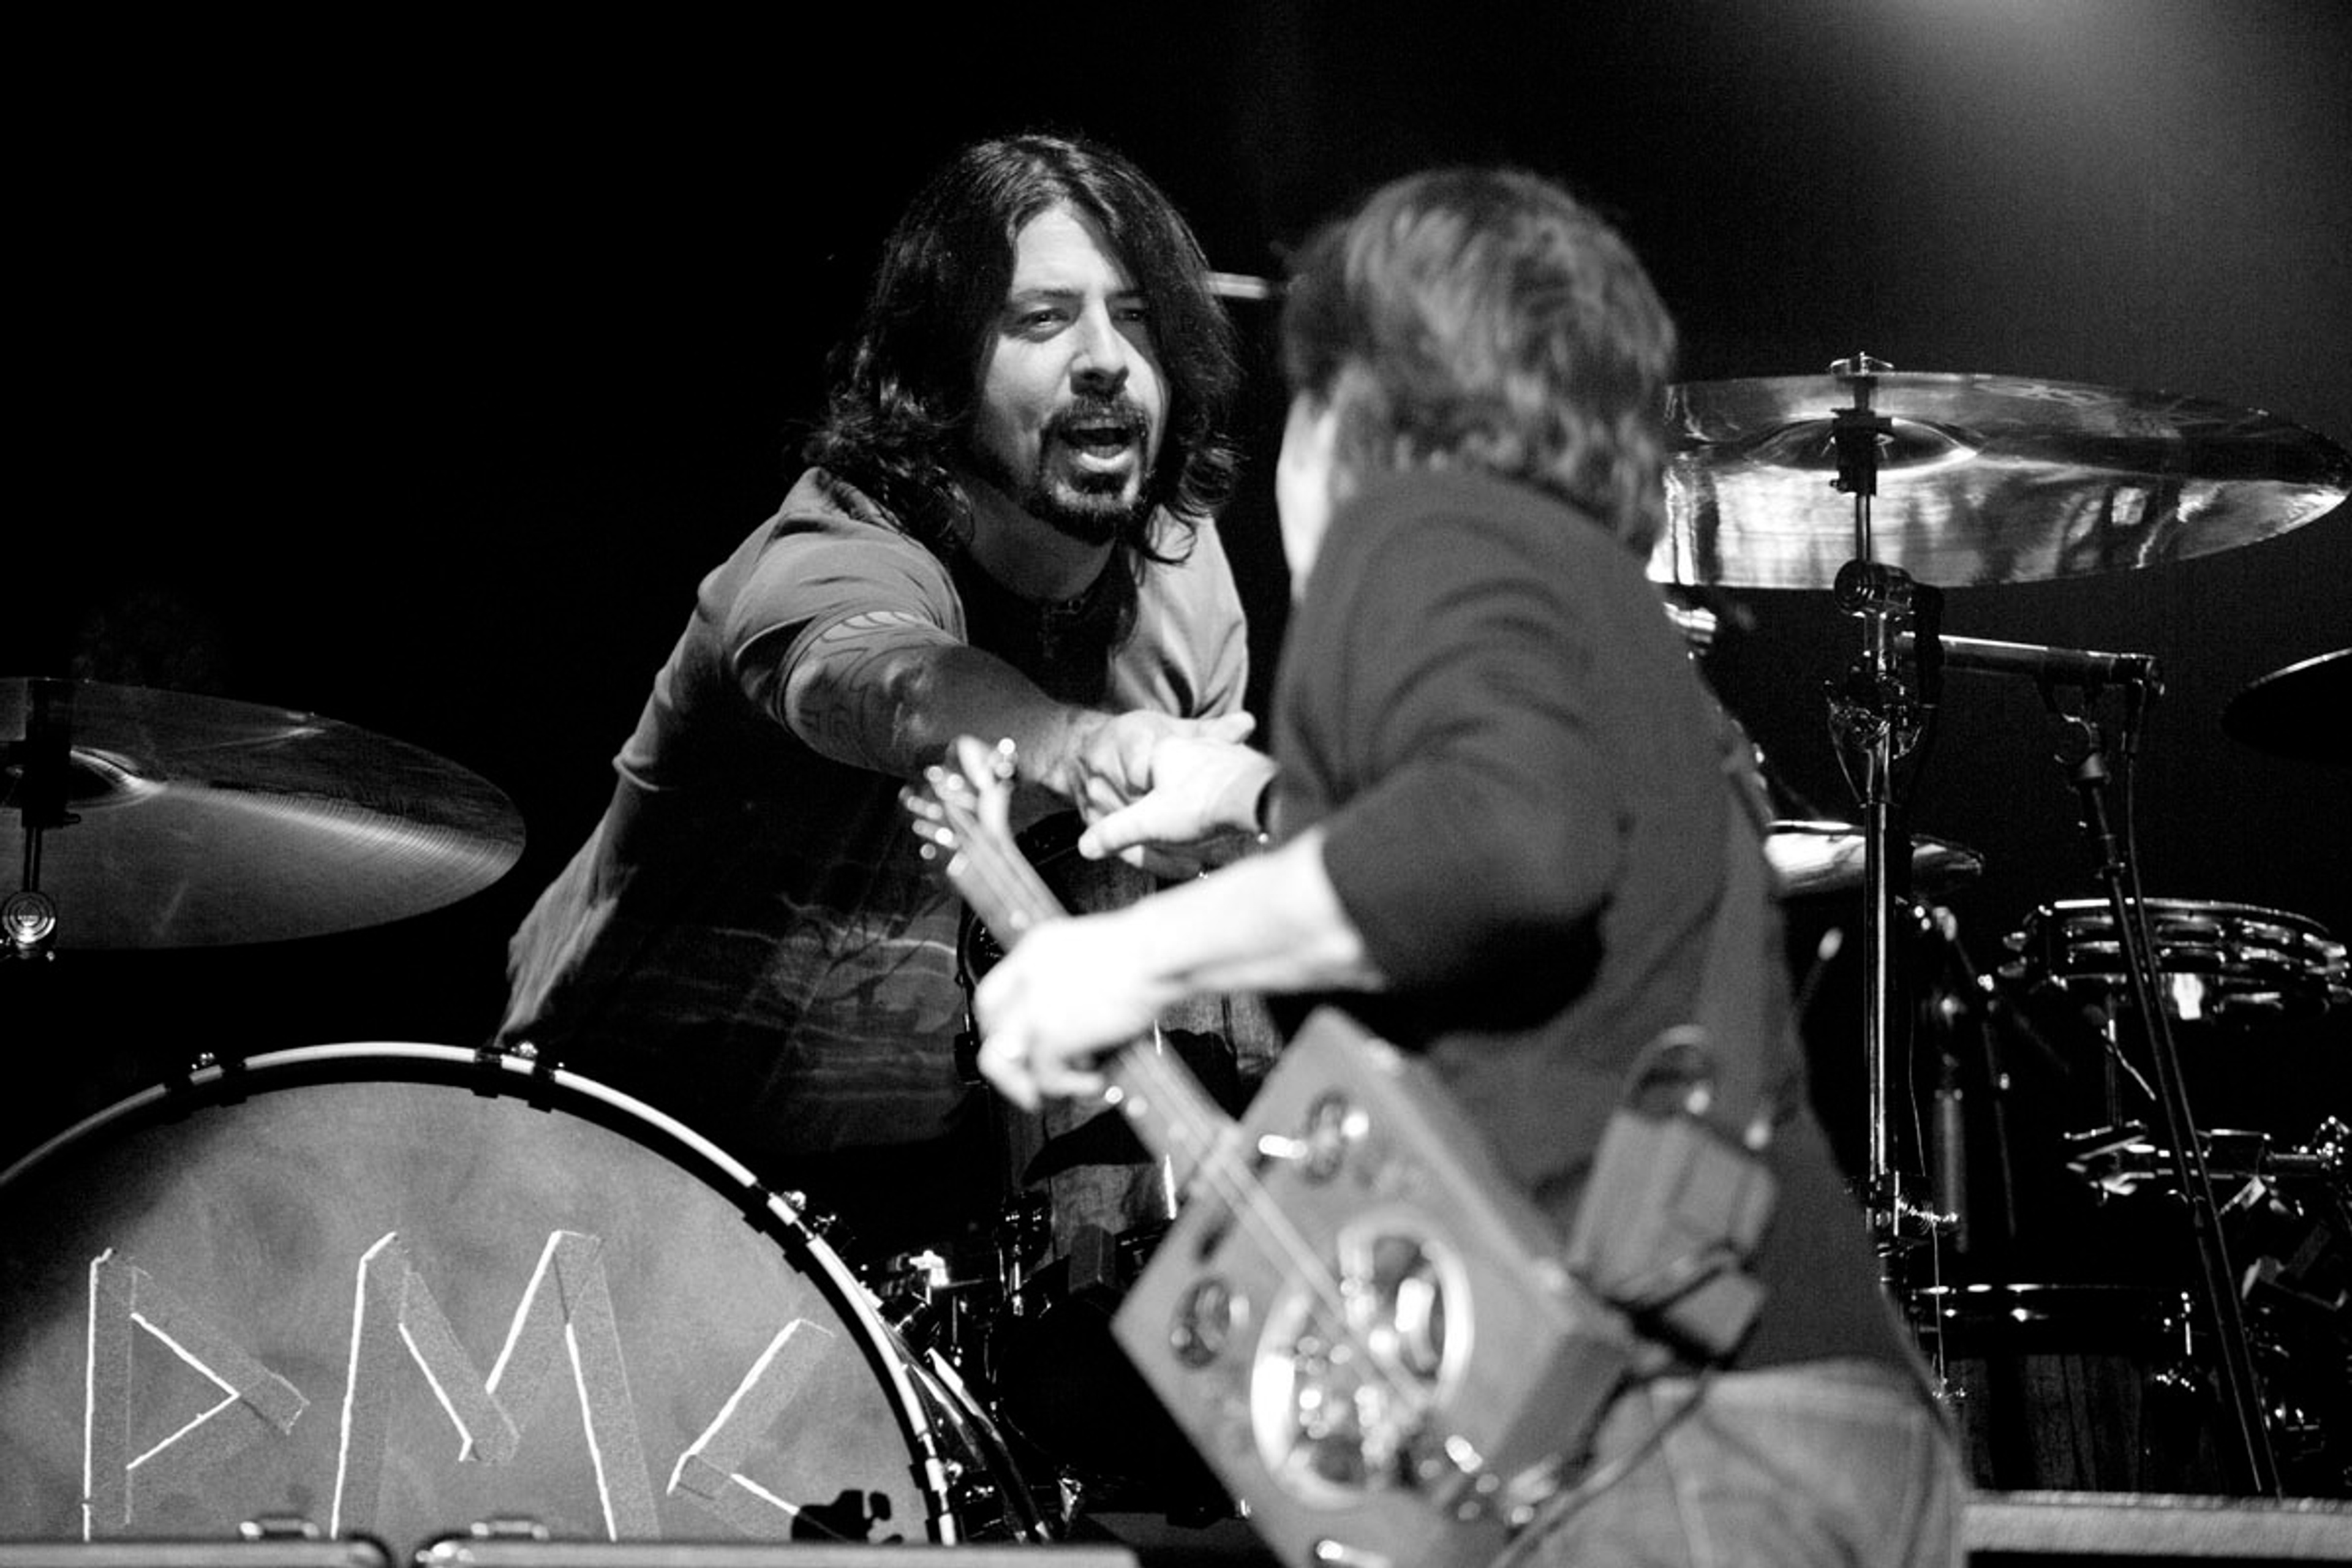 Dave Grohl and Paul at the 12-12-12 rehearsals, 12-12-12 Hurricane Sandy Benefit, Madison Square Garden, NYC, 11th December 2012